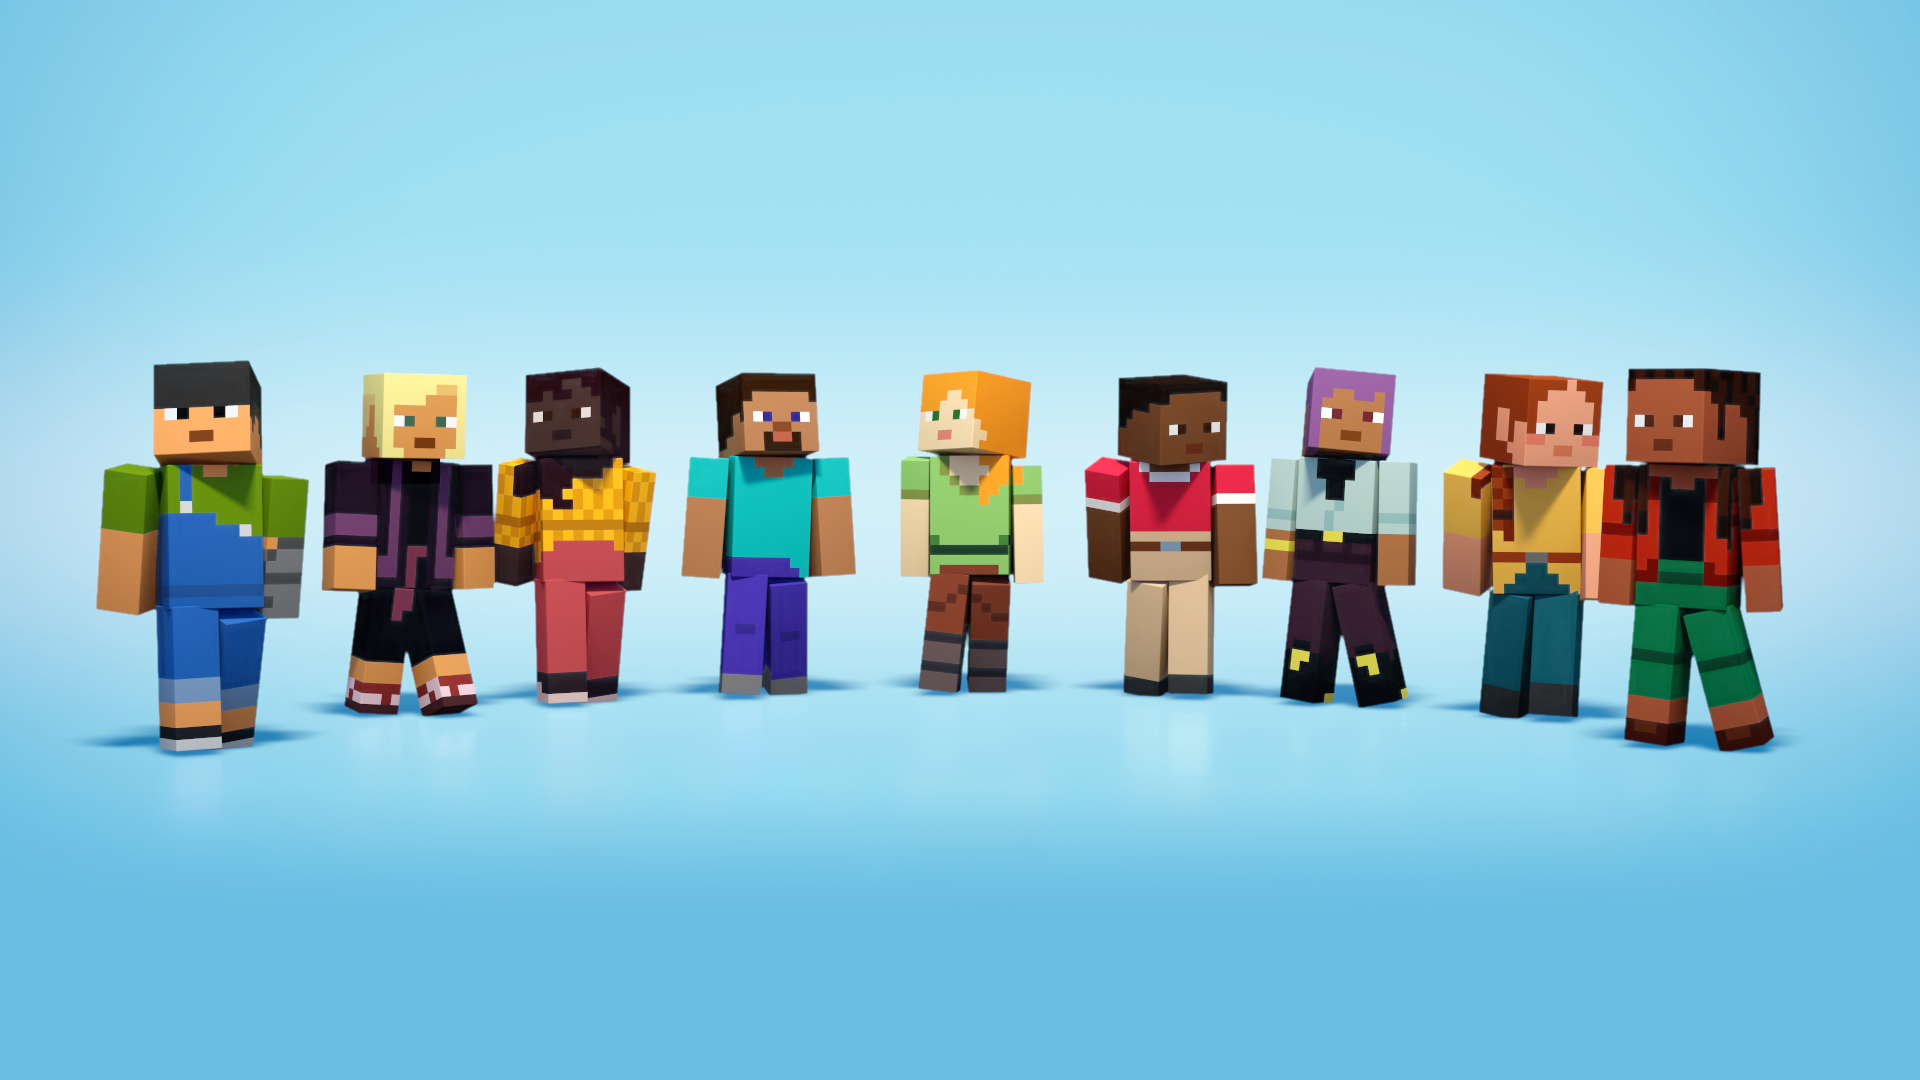 A group of Minecraft game characters standing in a row, representing diversity in the gaming community